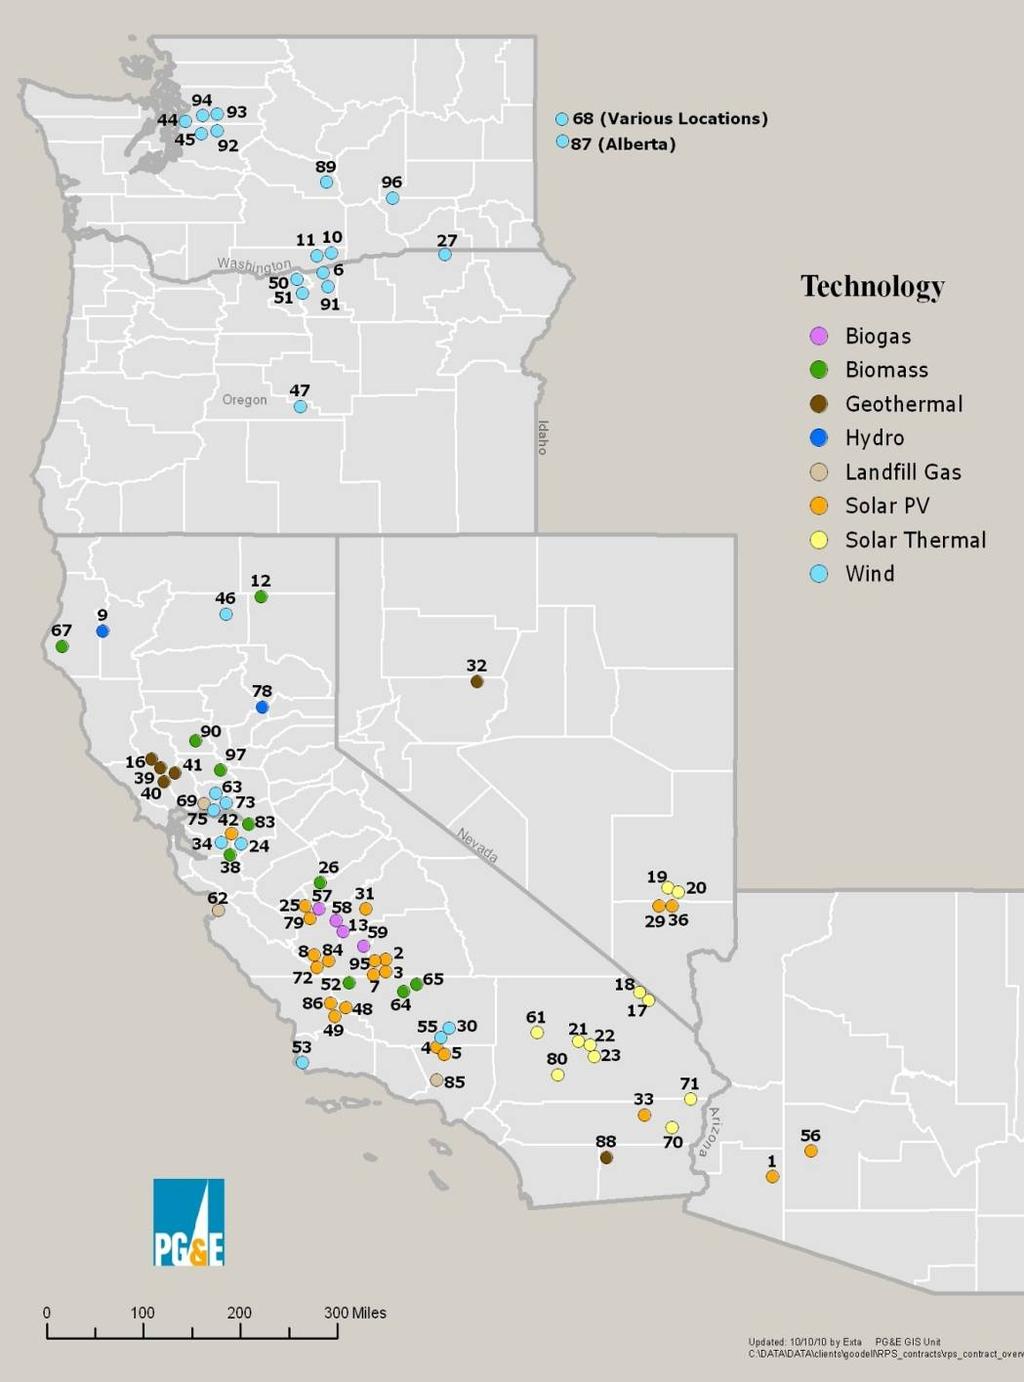 PG&E maintains a a diverse mix % of MW contracted Small Hydro 1% 8% Geothermal Solar Thermal 31% Wind 32% Solar PV 25% 3% Bioenergy (Map content as of 10/15/2010; other material as of